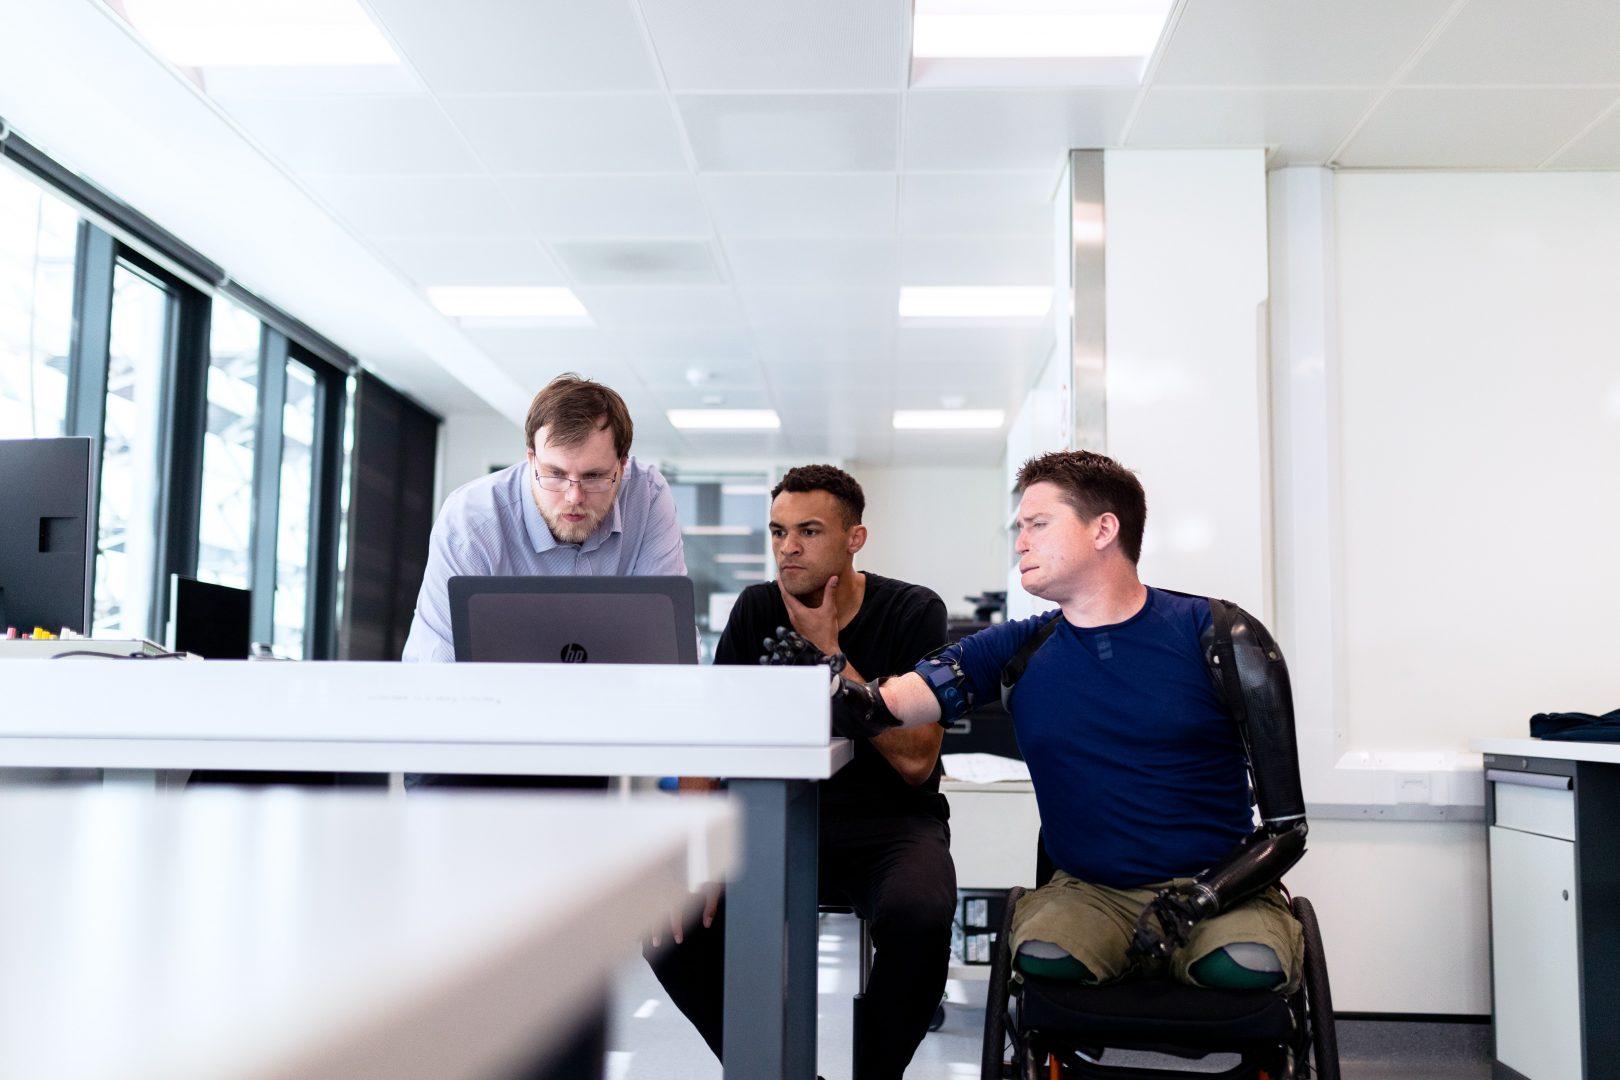 Three men (From left to right: Caucaian male wearing blue button down with brown beard hair and bard leans down over a laptop, staring at the computer. An African American male holding his chin with one hand , sits in a chair and looks at the same laptop. A Caucaian male, sitting in a wheelchair, with two prosthetic arms and legs looks over at the same laptop.) Look at a laptop intensely. The are in a brightly lit white office.